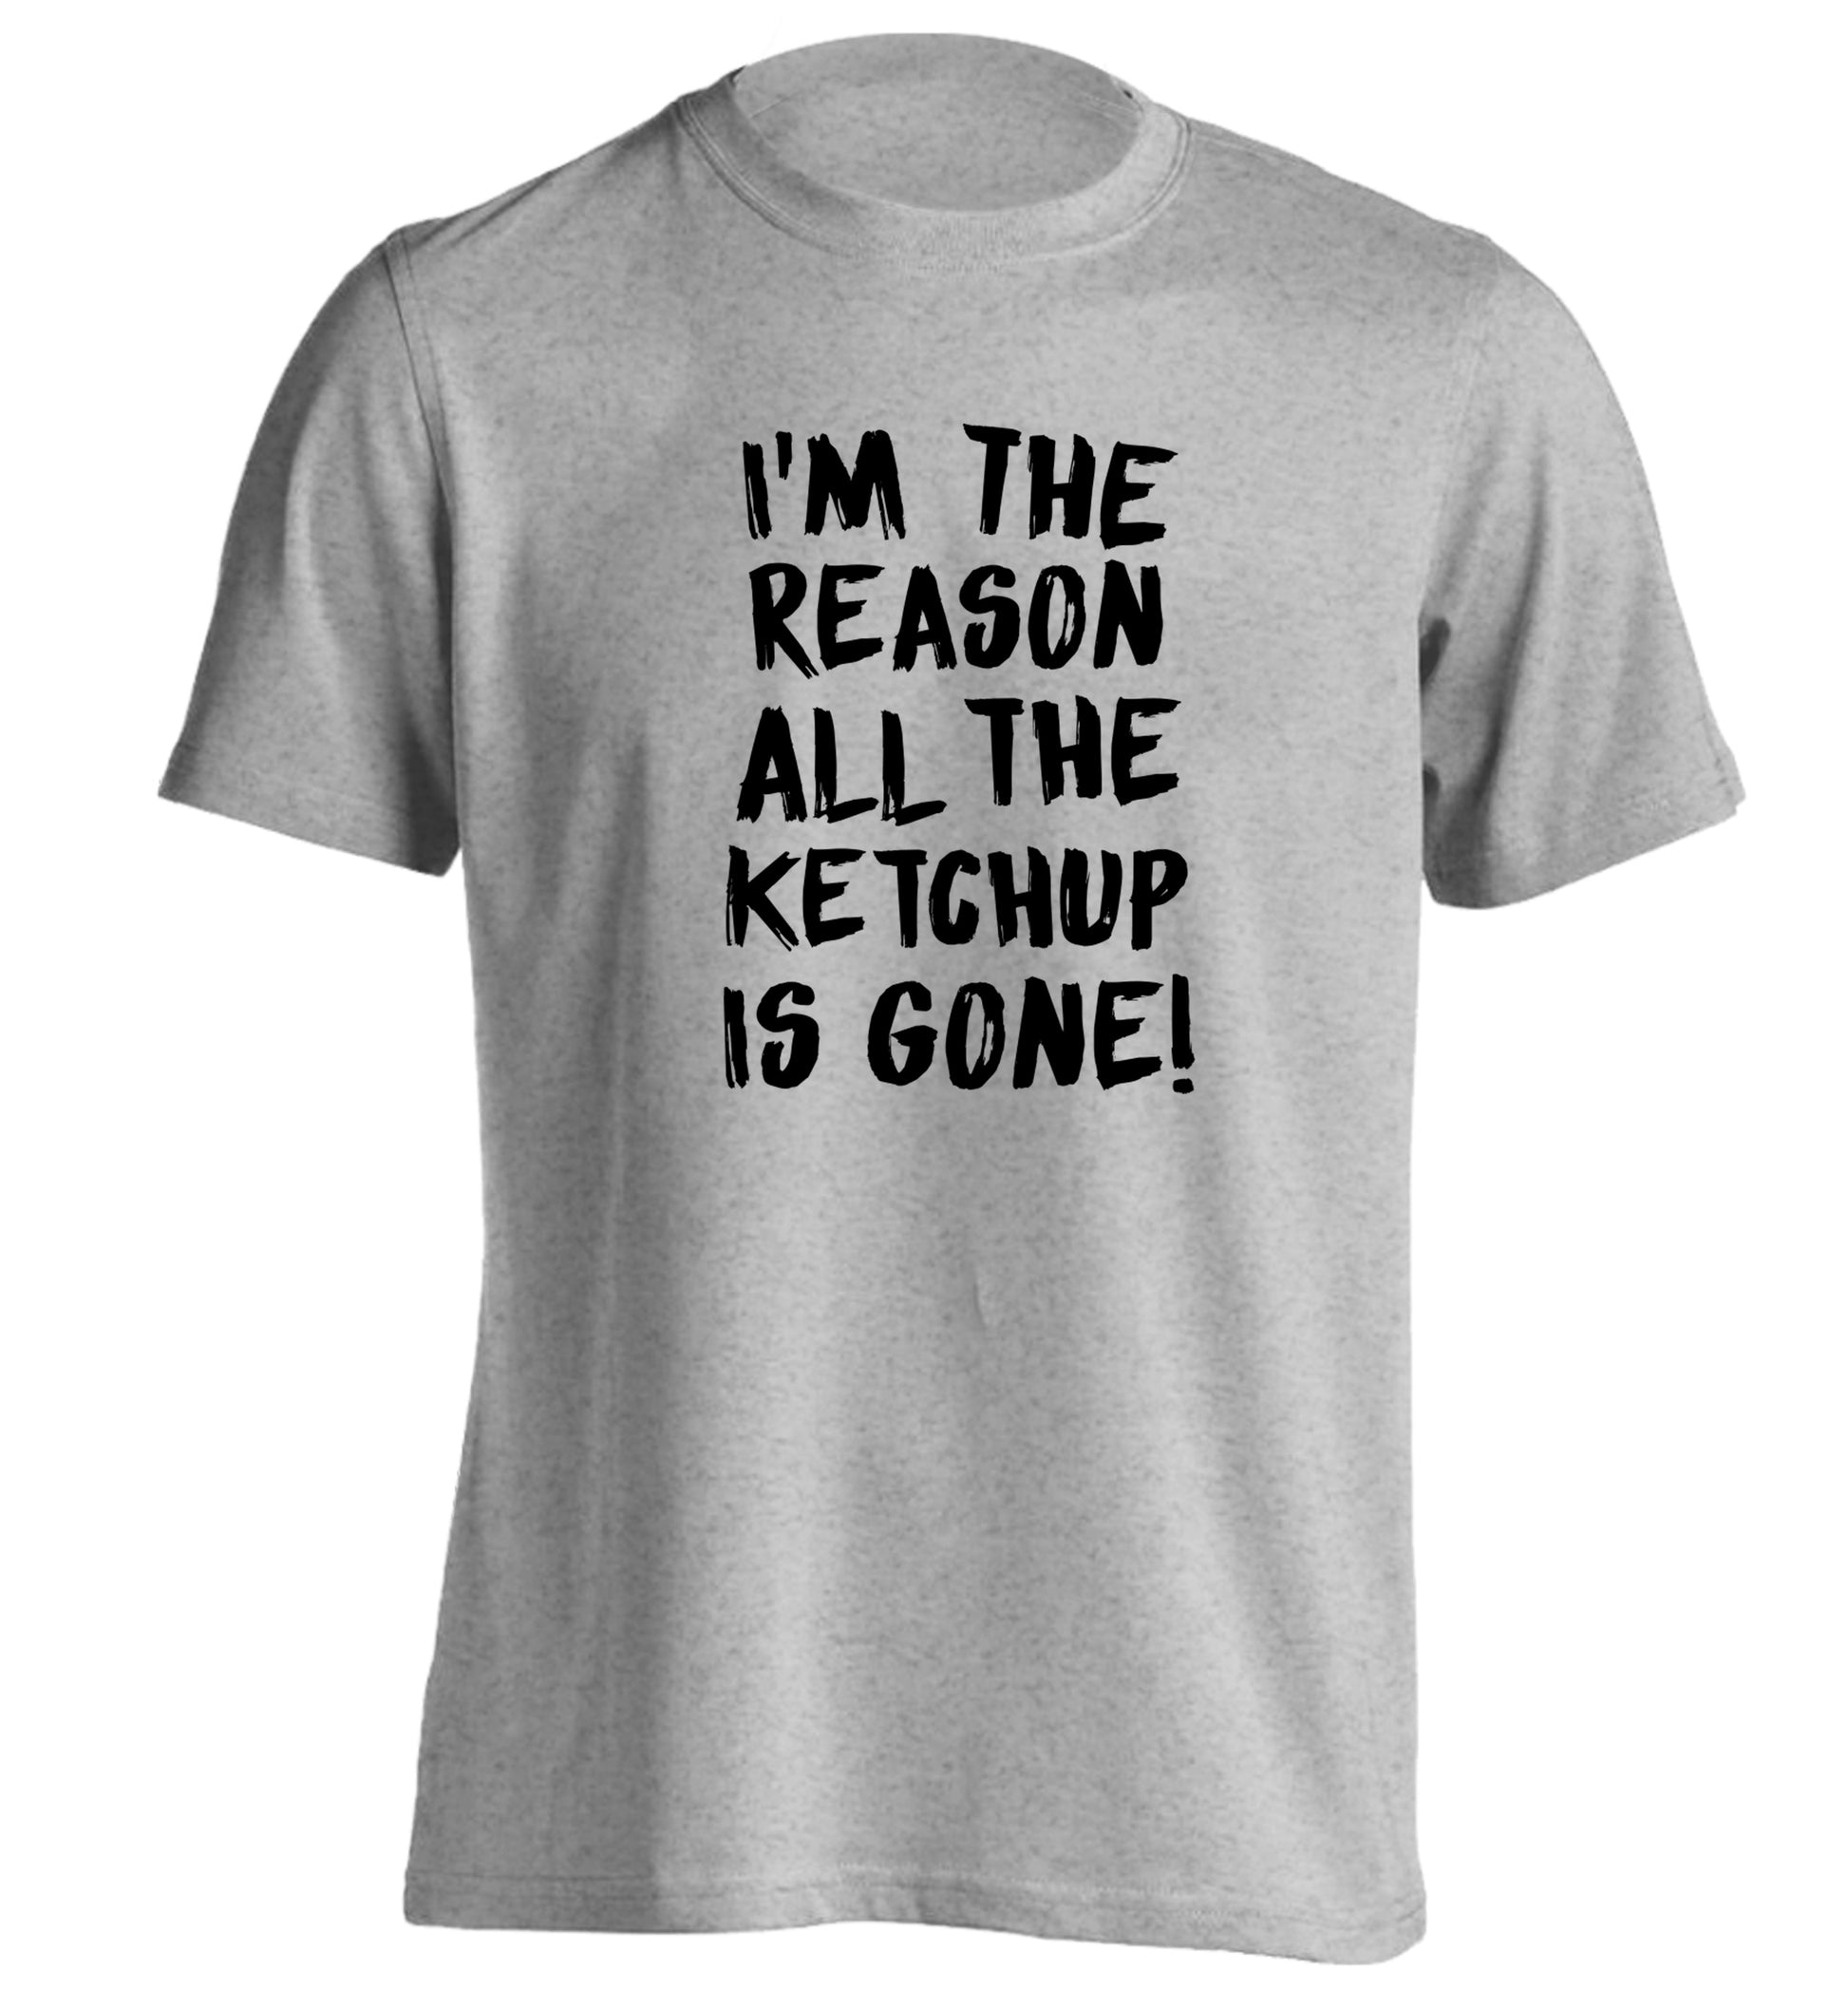 I'm the reason why all the ketchup is gone adults unisex grey Tshirt 2XL